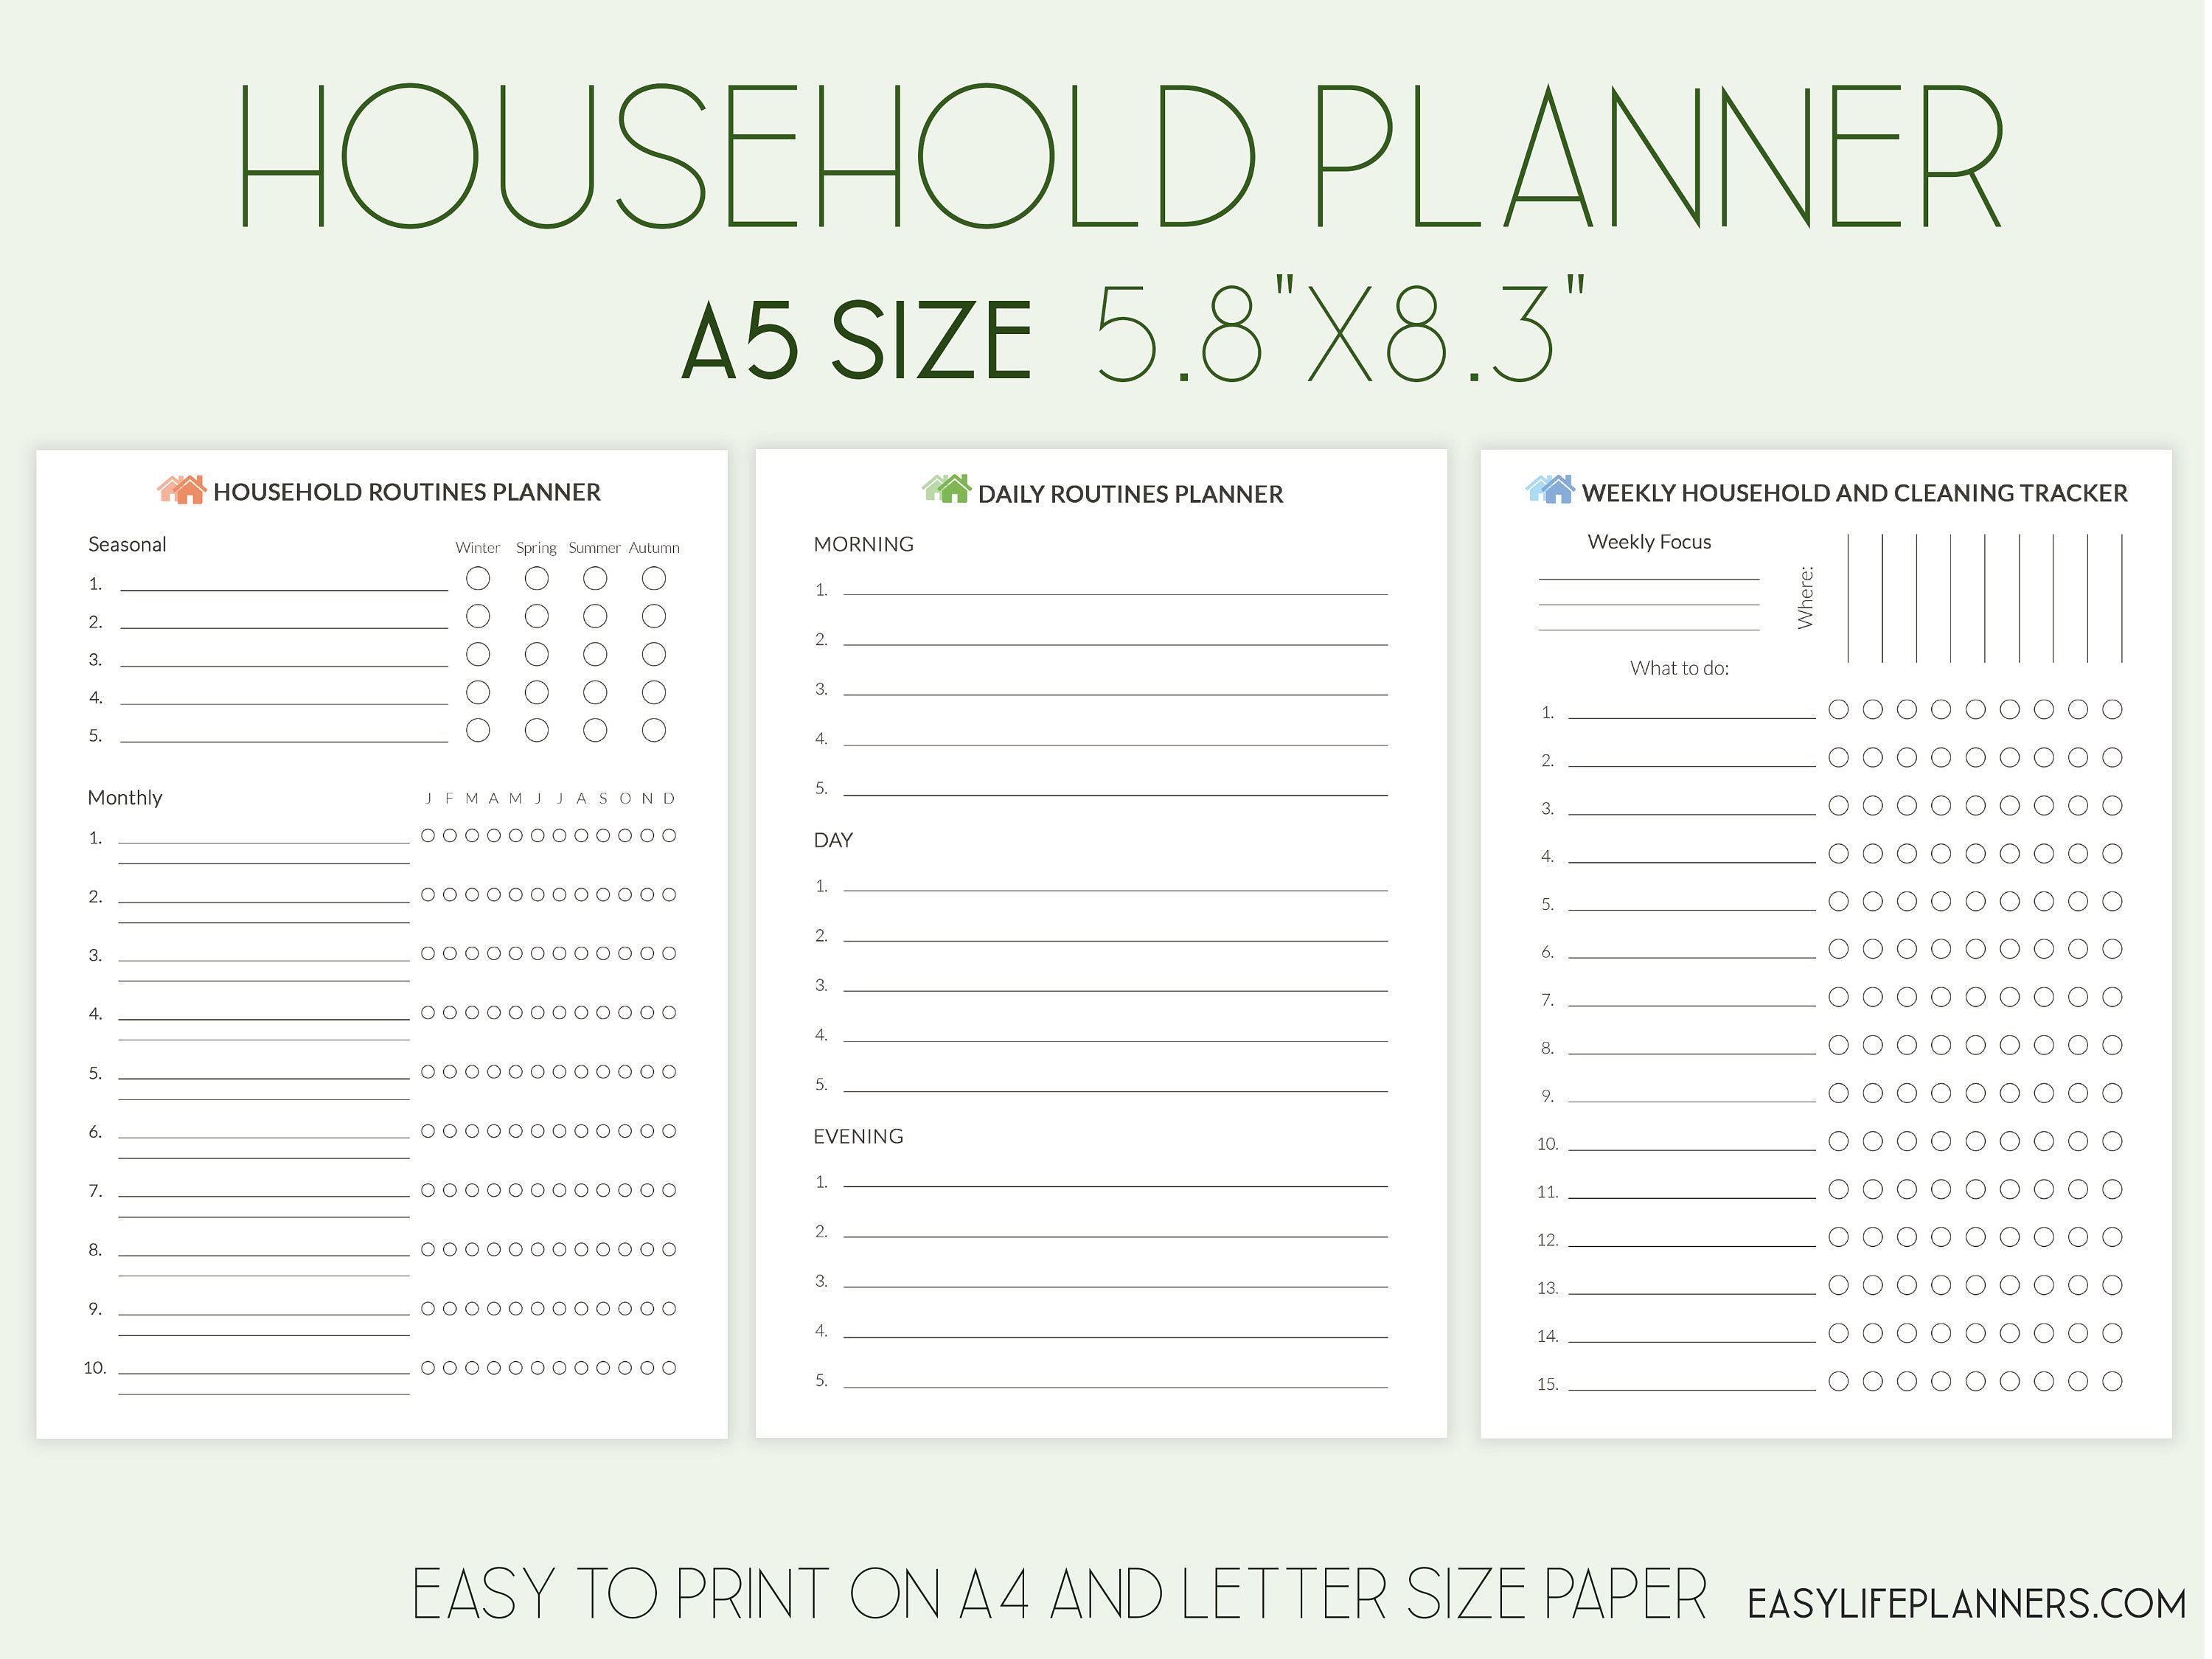 Cleaning plan. Cleaning Planner. Weekly Cleaning Planner. Daily Cleaning Planner Journal. Daily Cleaning Special tasks list.